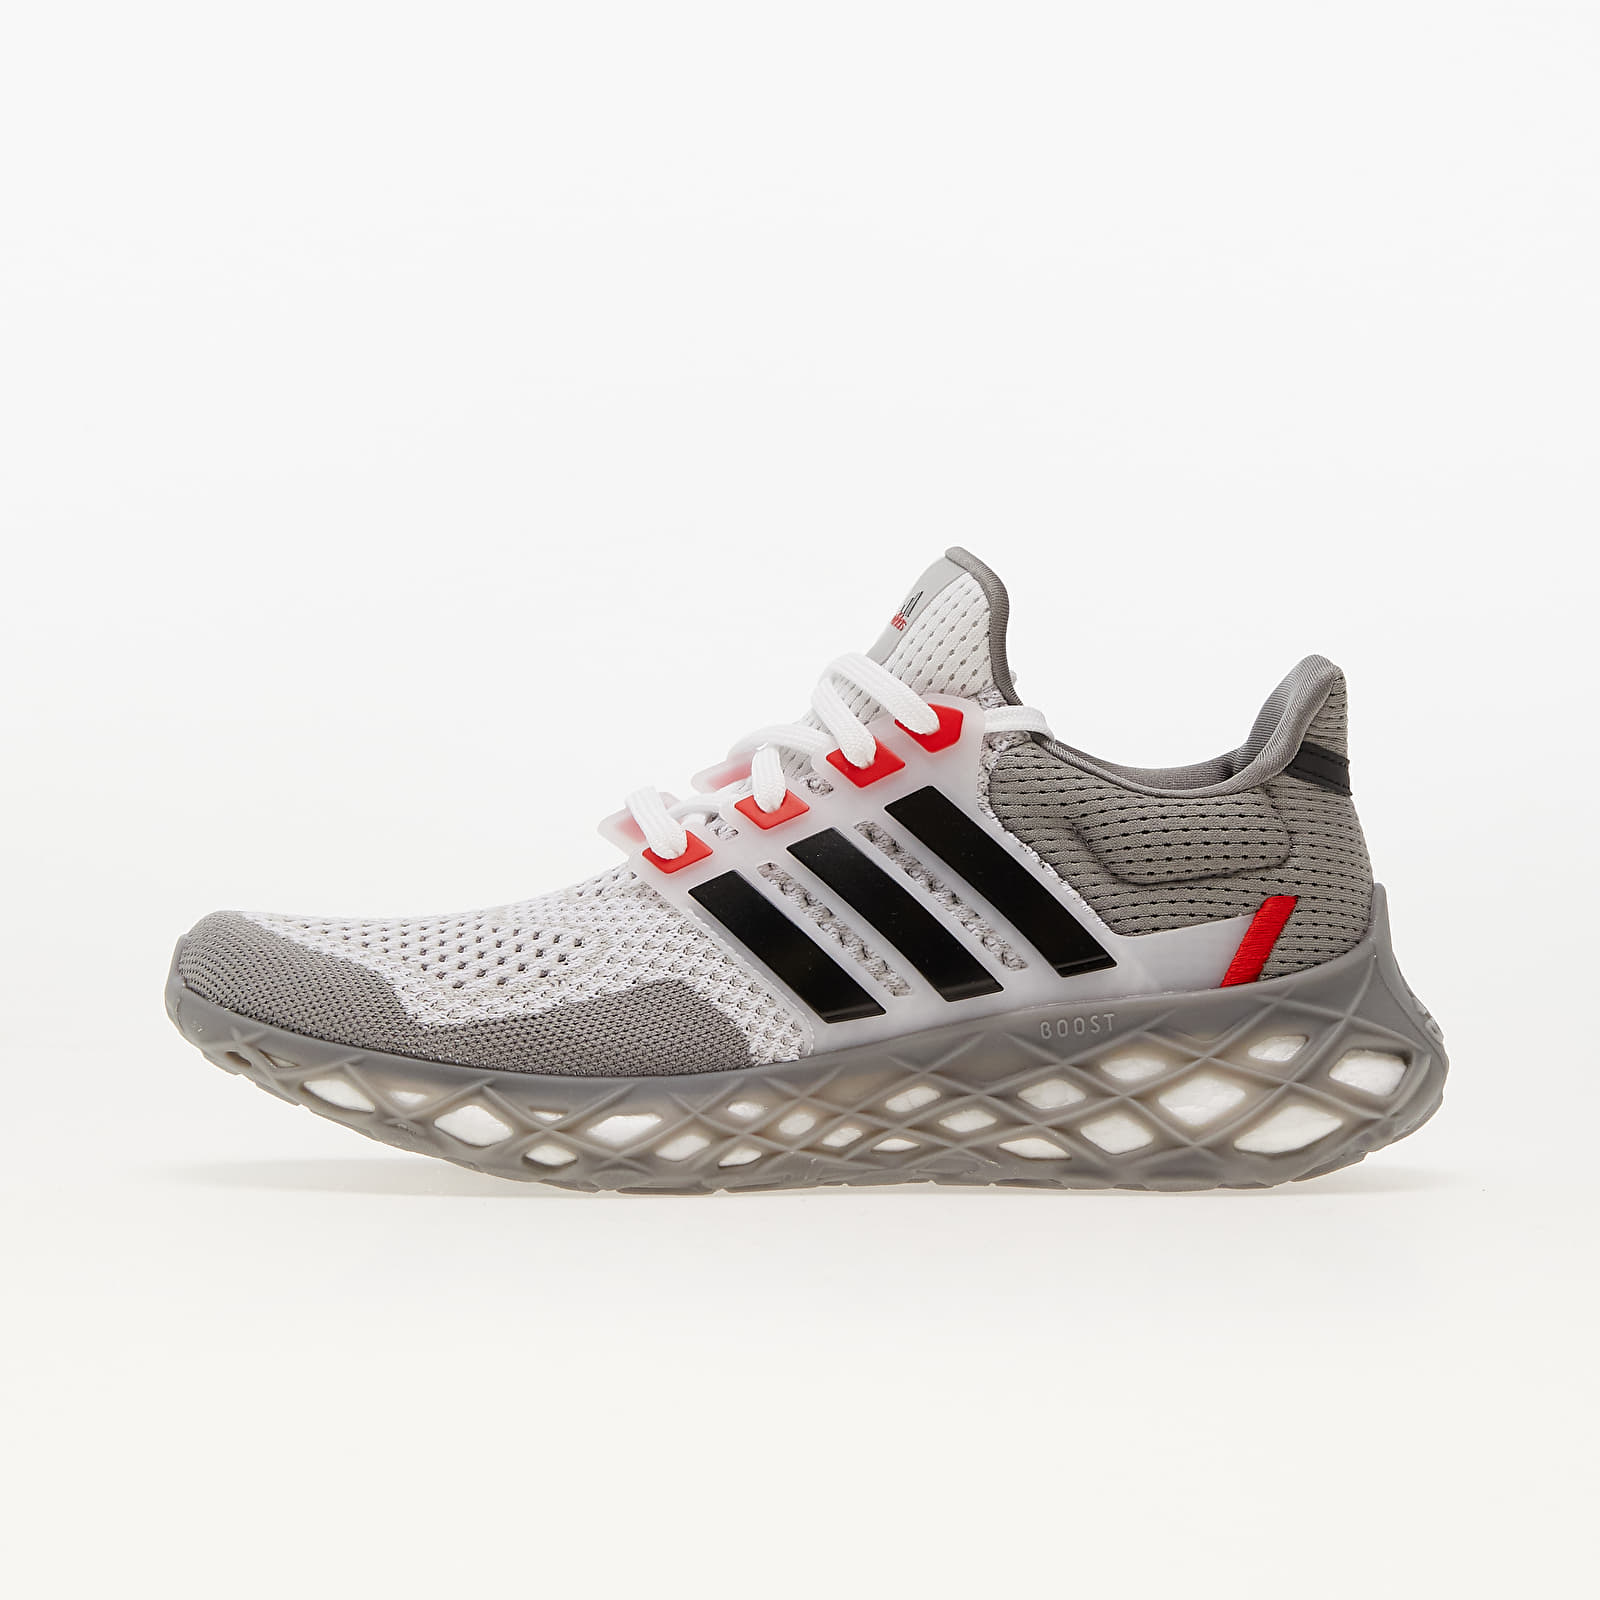 Chaussures et baskets homme adidas UltraBOOST Web DNA Grey One/ Core Black/ Vivid Red